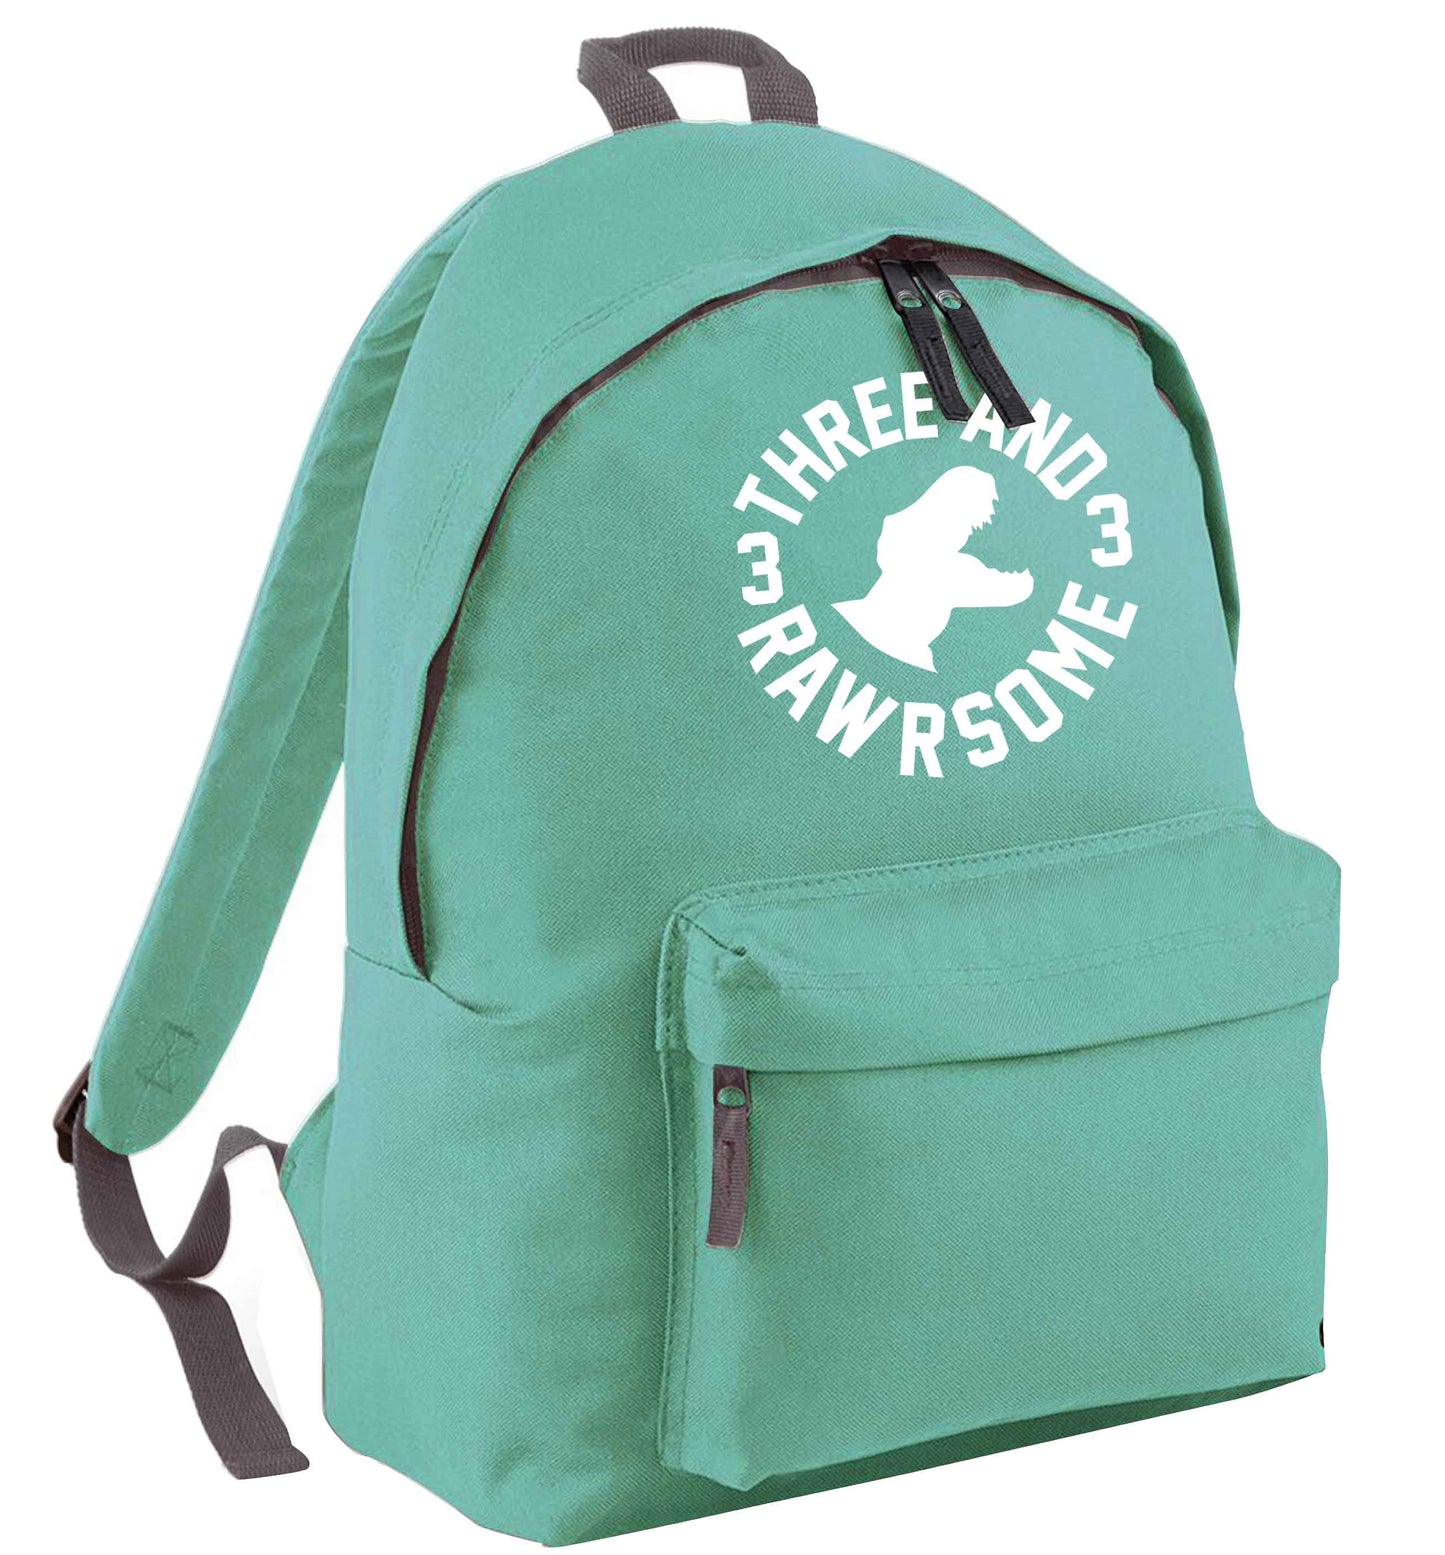 Three and rawrsome mint adults backpack